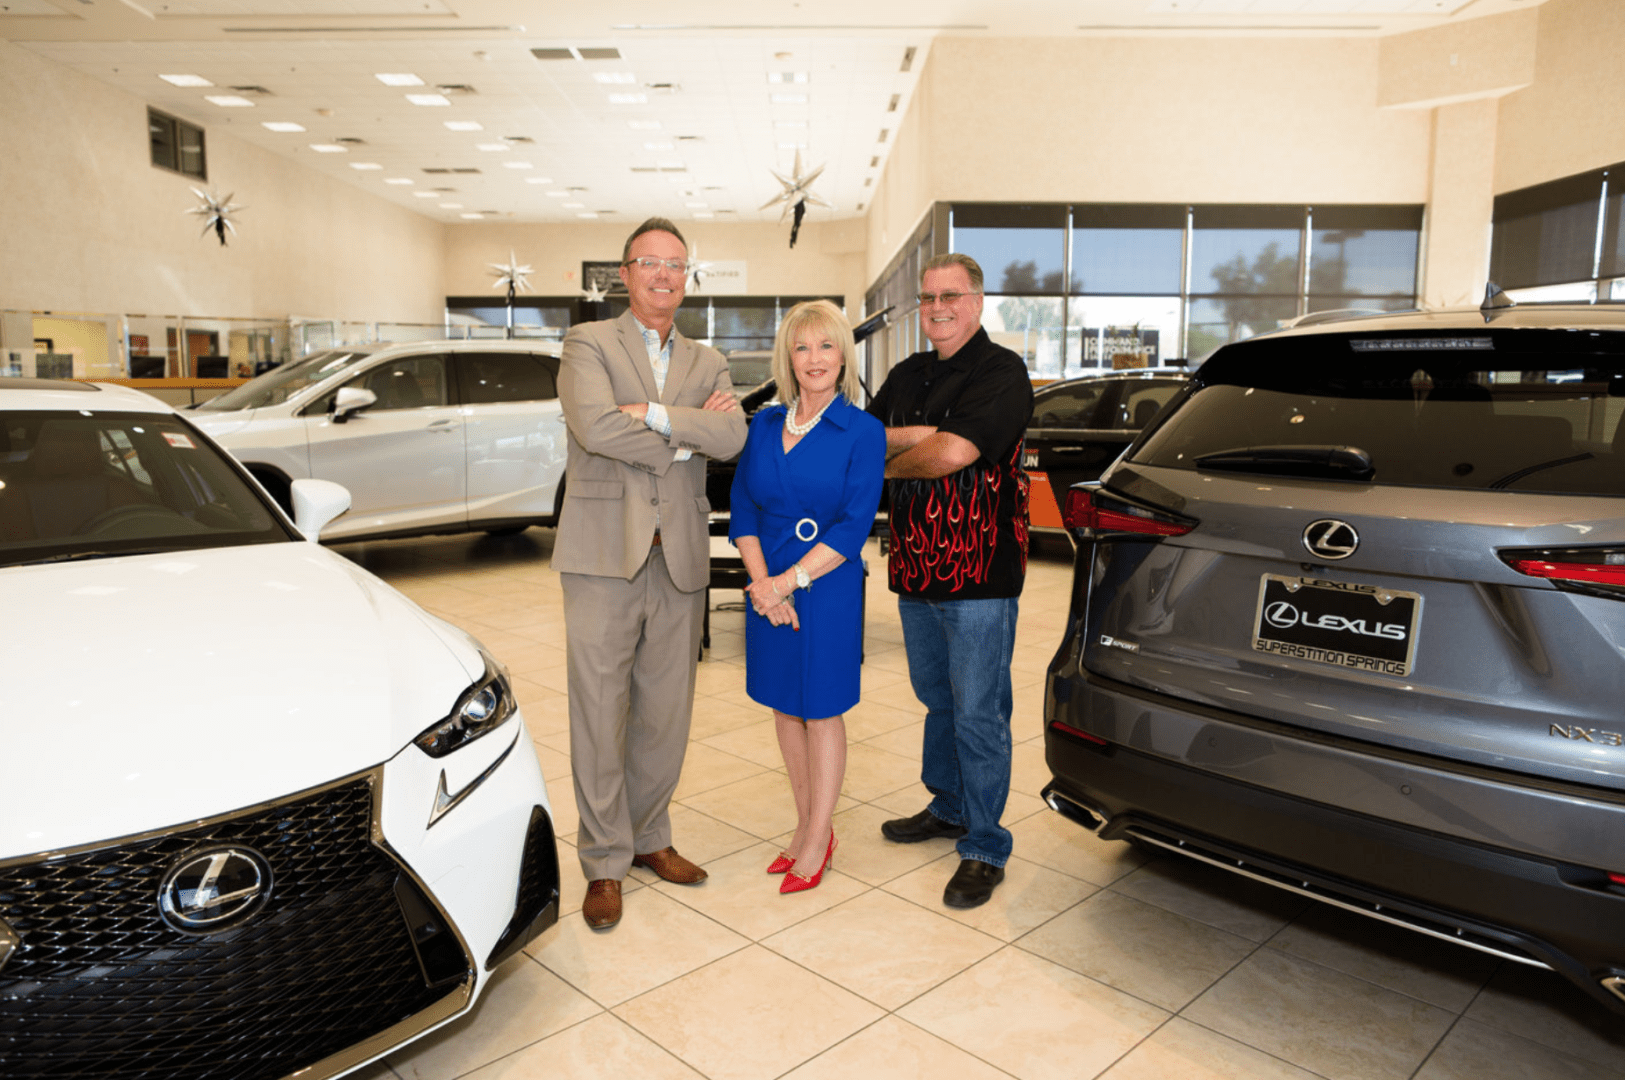 Three adults smiling in a car dealership, standing between a white and a gray lexus car.